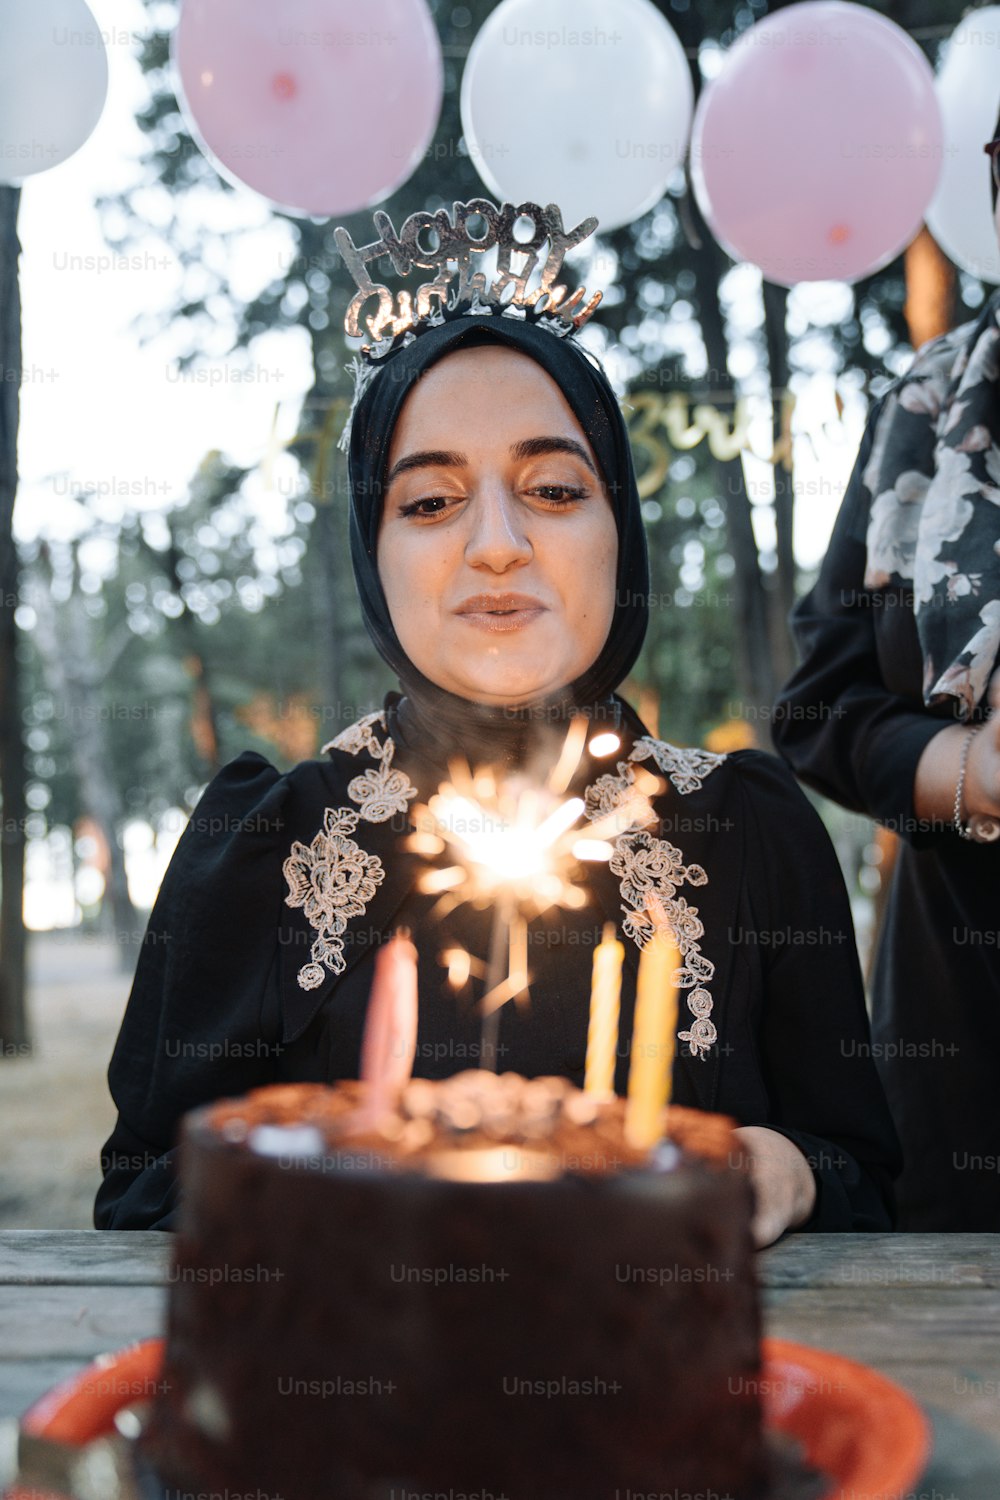 a woman wearing a tiara blowing out candles on a cake